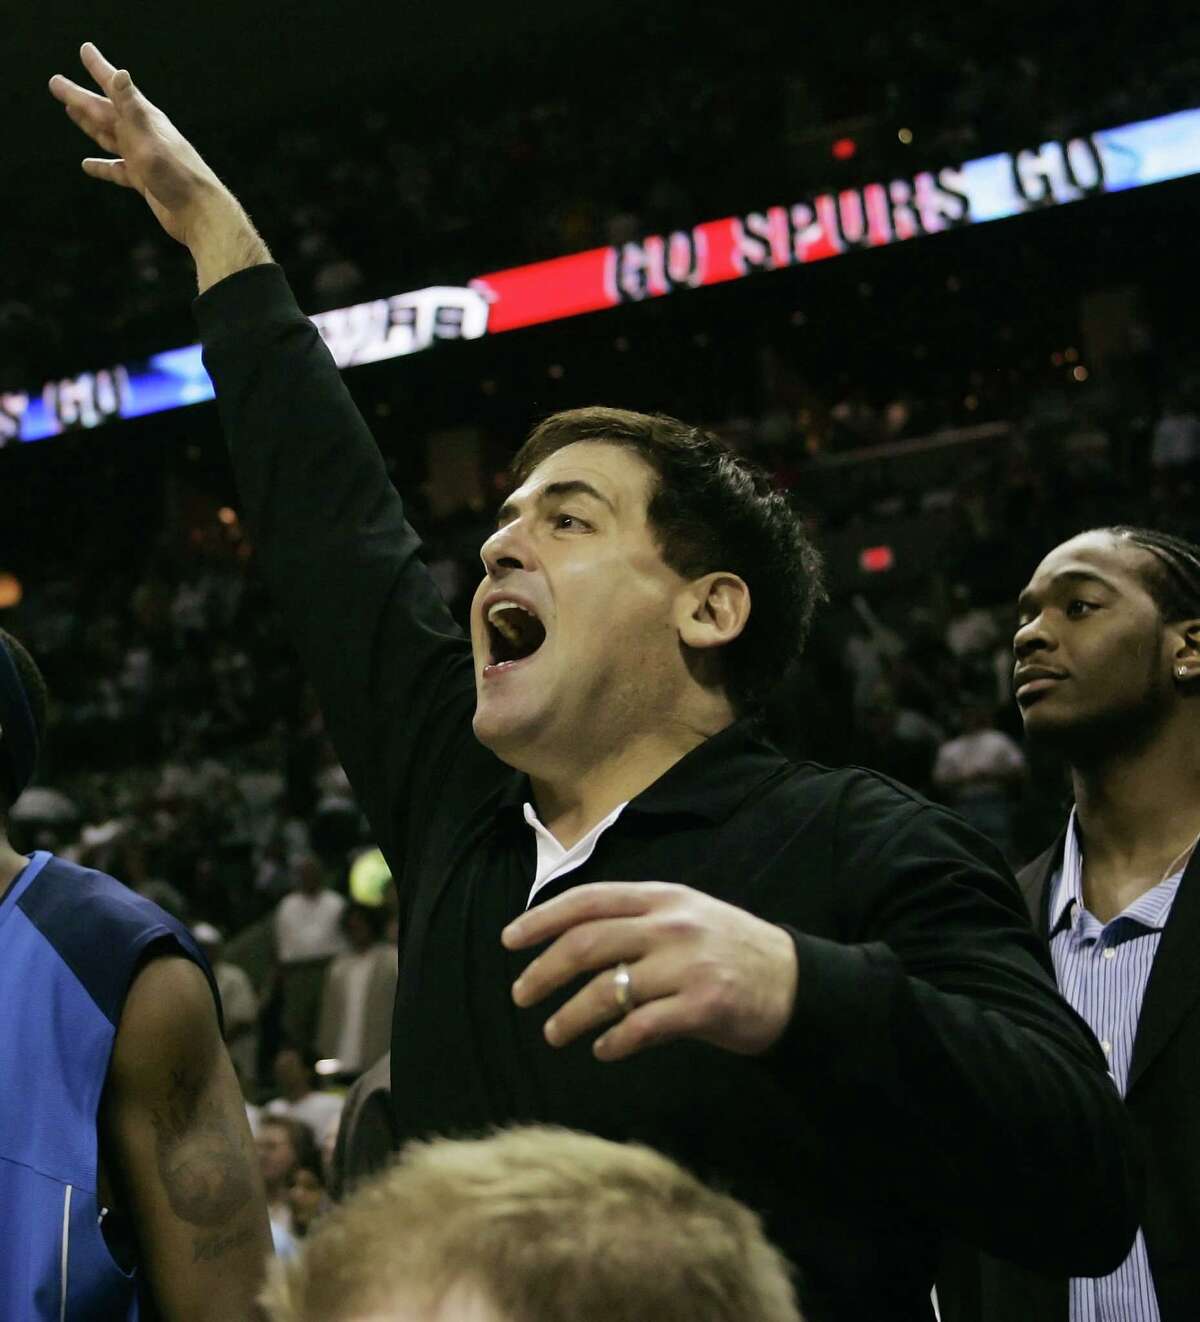 Dallas Mavericks owner Mark Cuban celebrates at the end of Game 7 against the San Antonio Spurs in the Western Conference semifinals during the 2006 NBA playoffs in San Antonio on May 22, 2006.